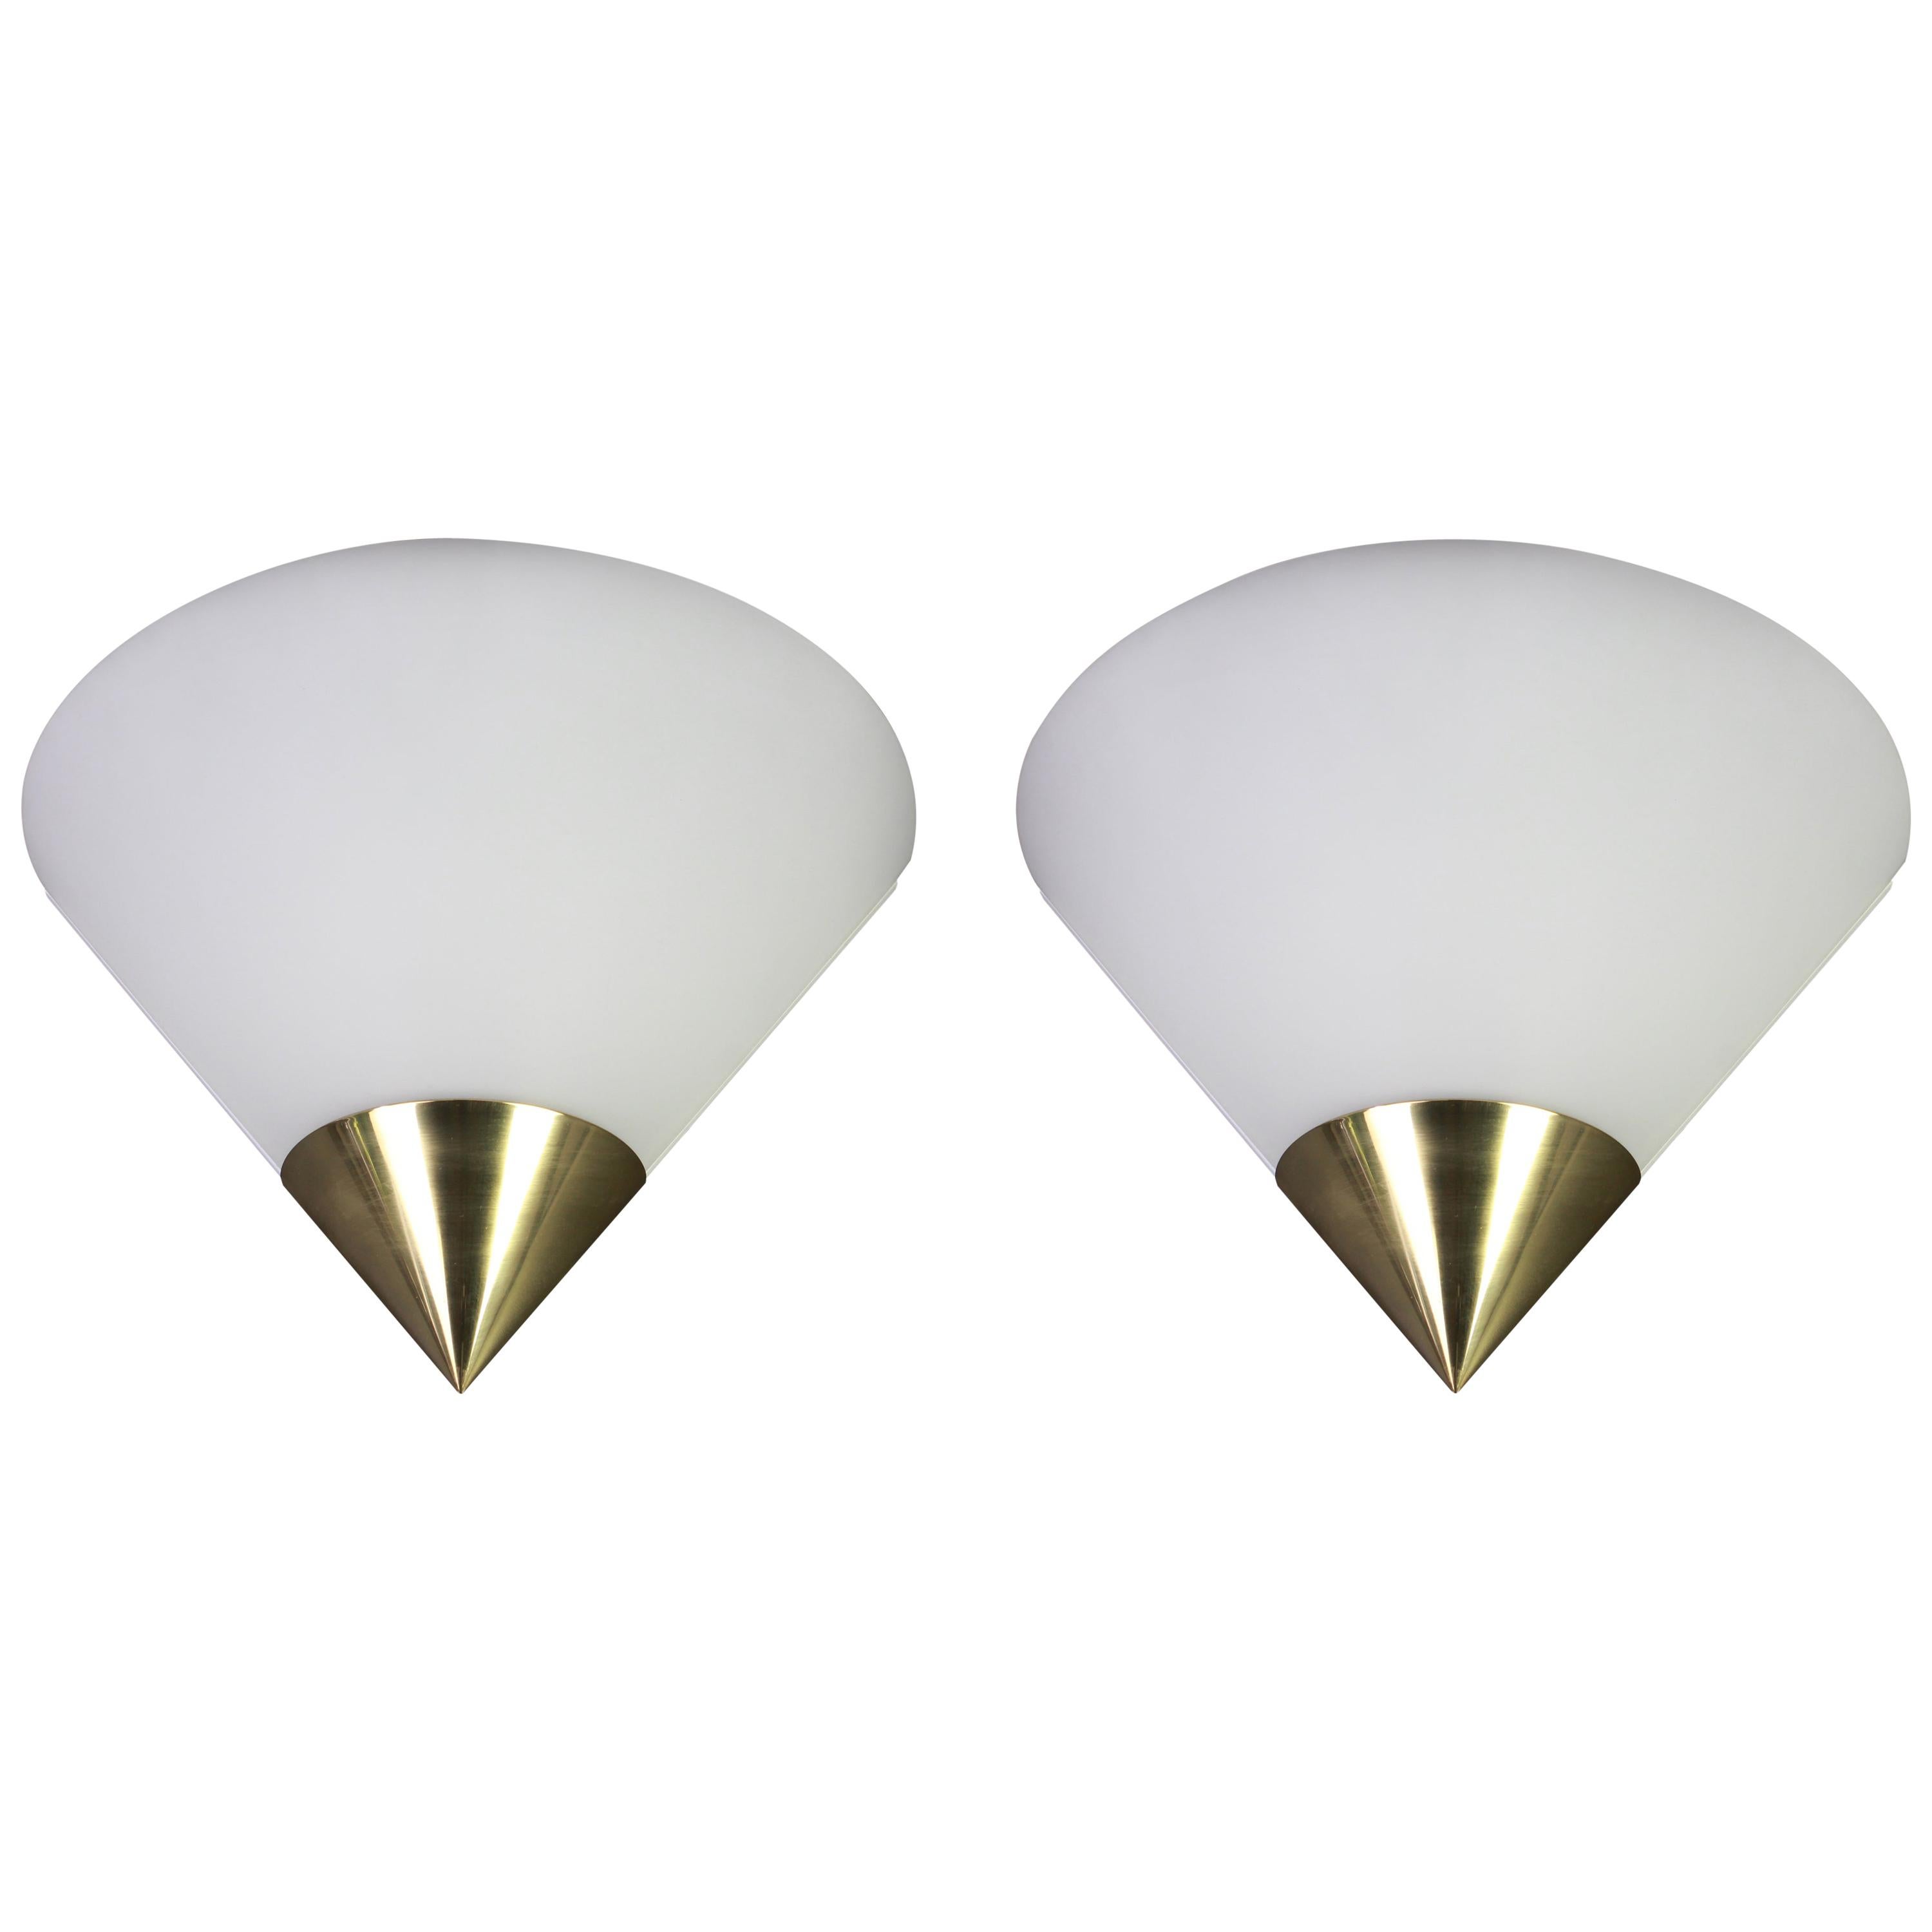 Pair of Opal Glass Sconces Designed by Limburg, Germany